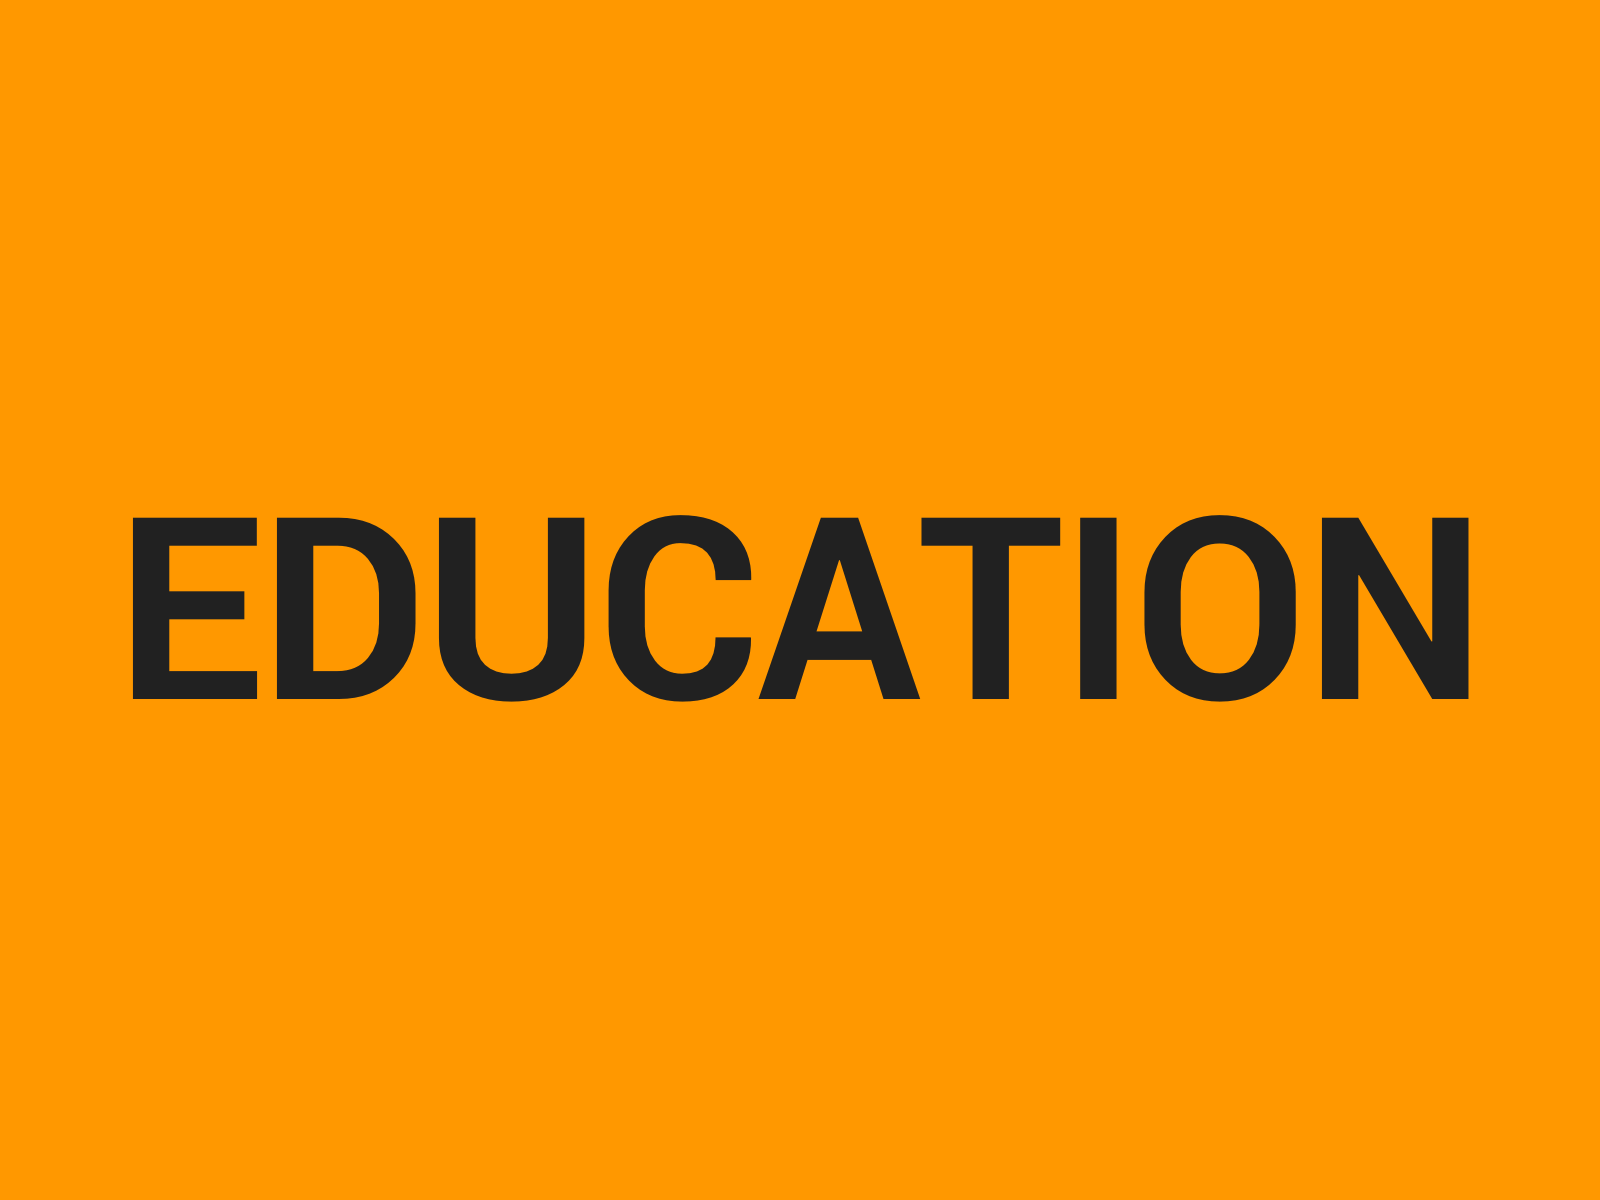 Induction – Education (card).png